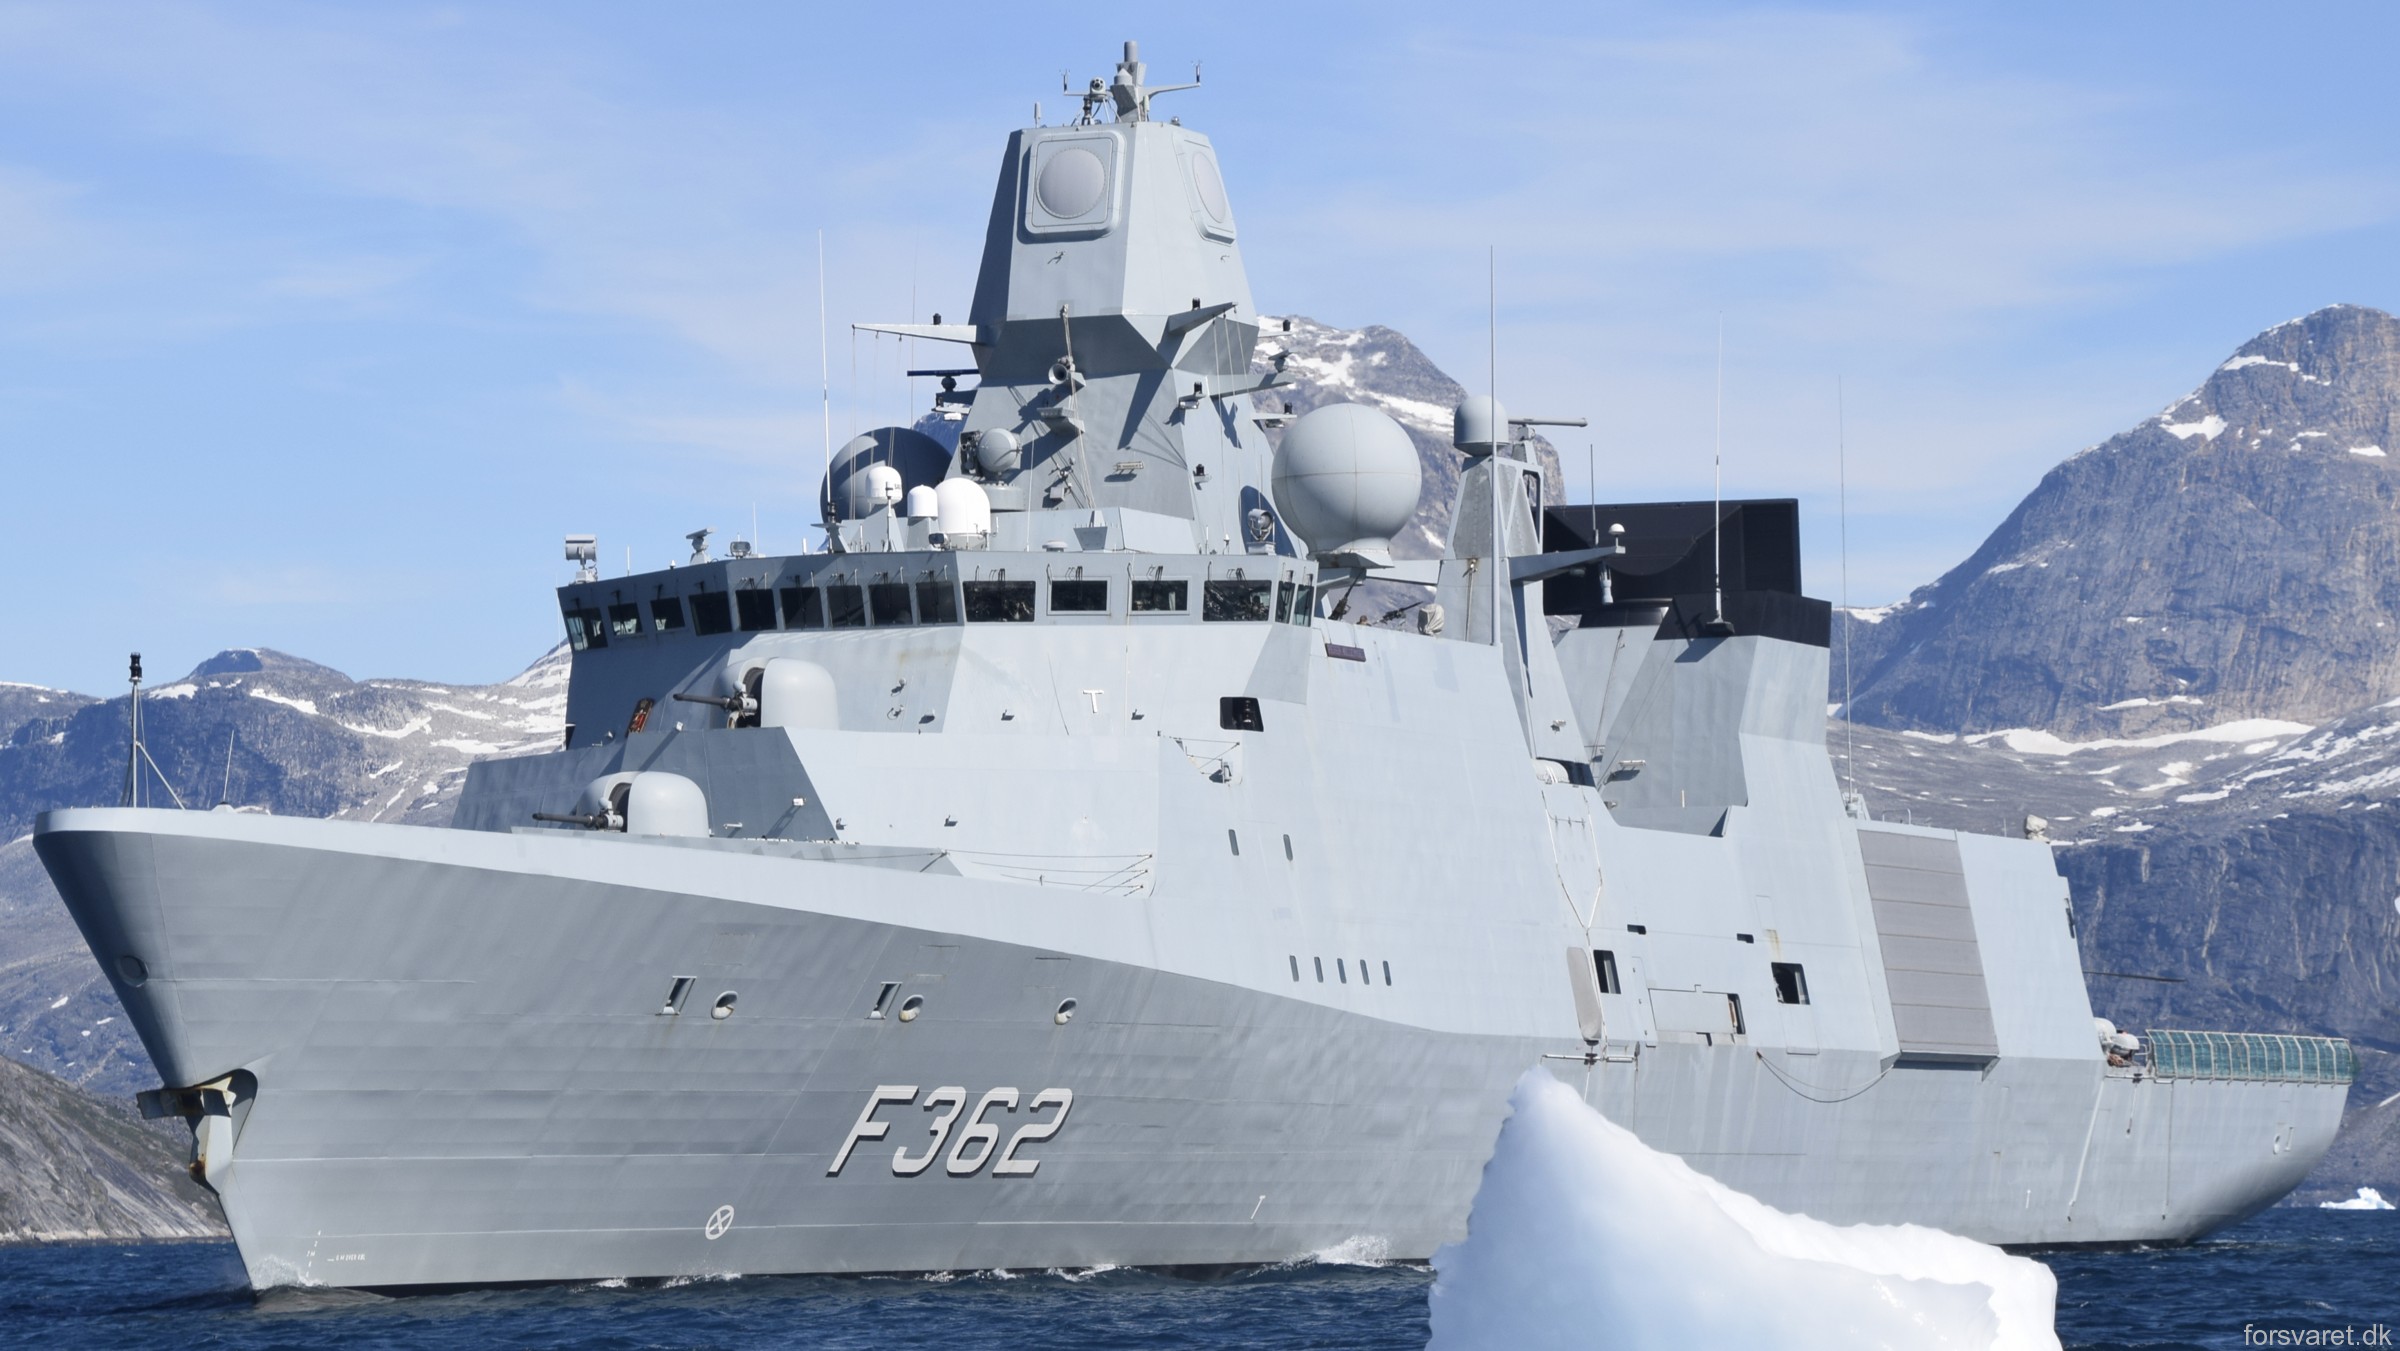 f-362 hdms peter willemoes iver huitfeldt class guided missile frigate ffg royal danish navy 27